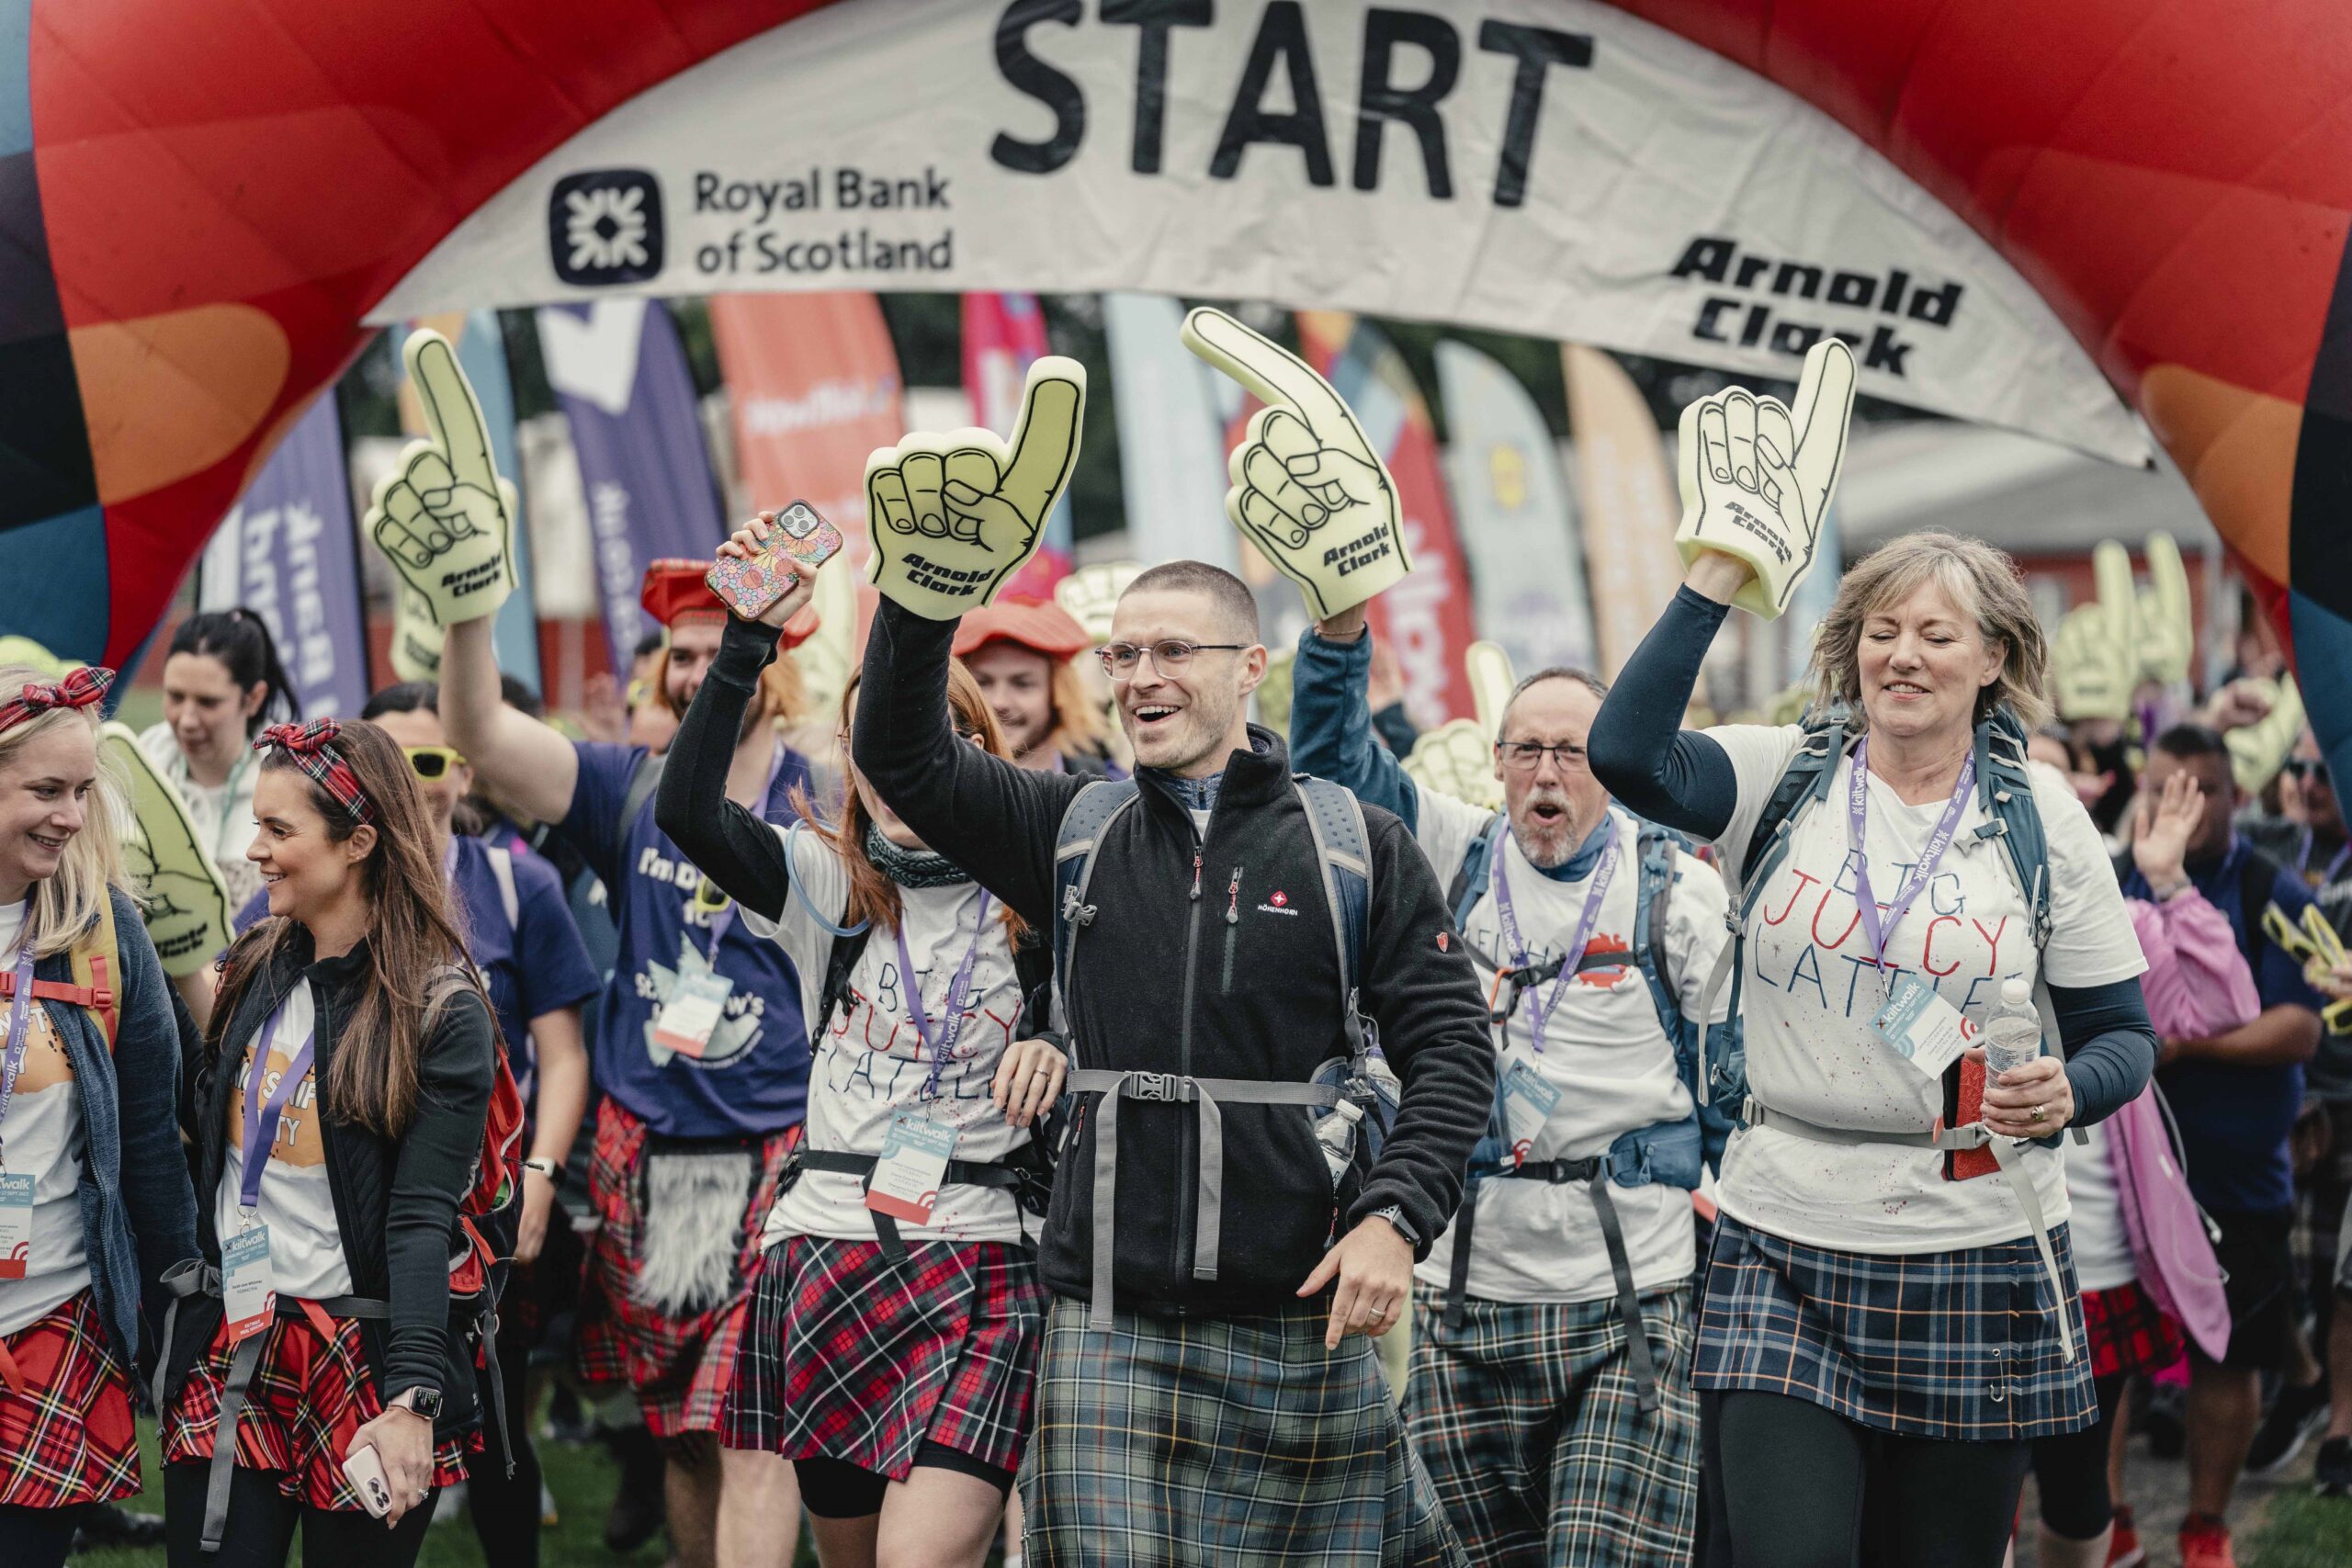 Participants in the Kiltwalk walk from the start line. All are wearing kilts, smiling and raising their hands in the air.